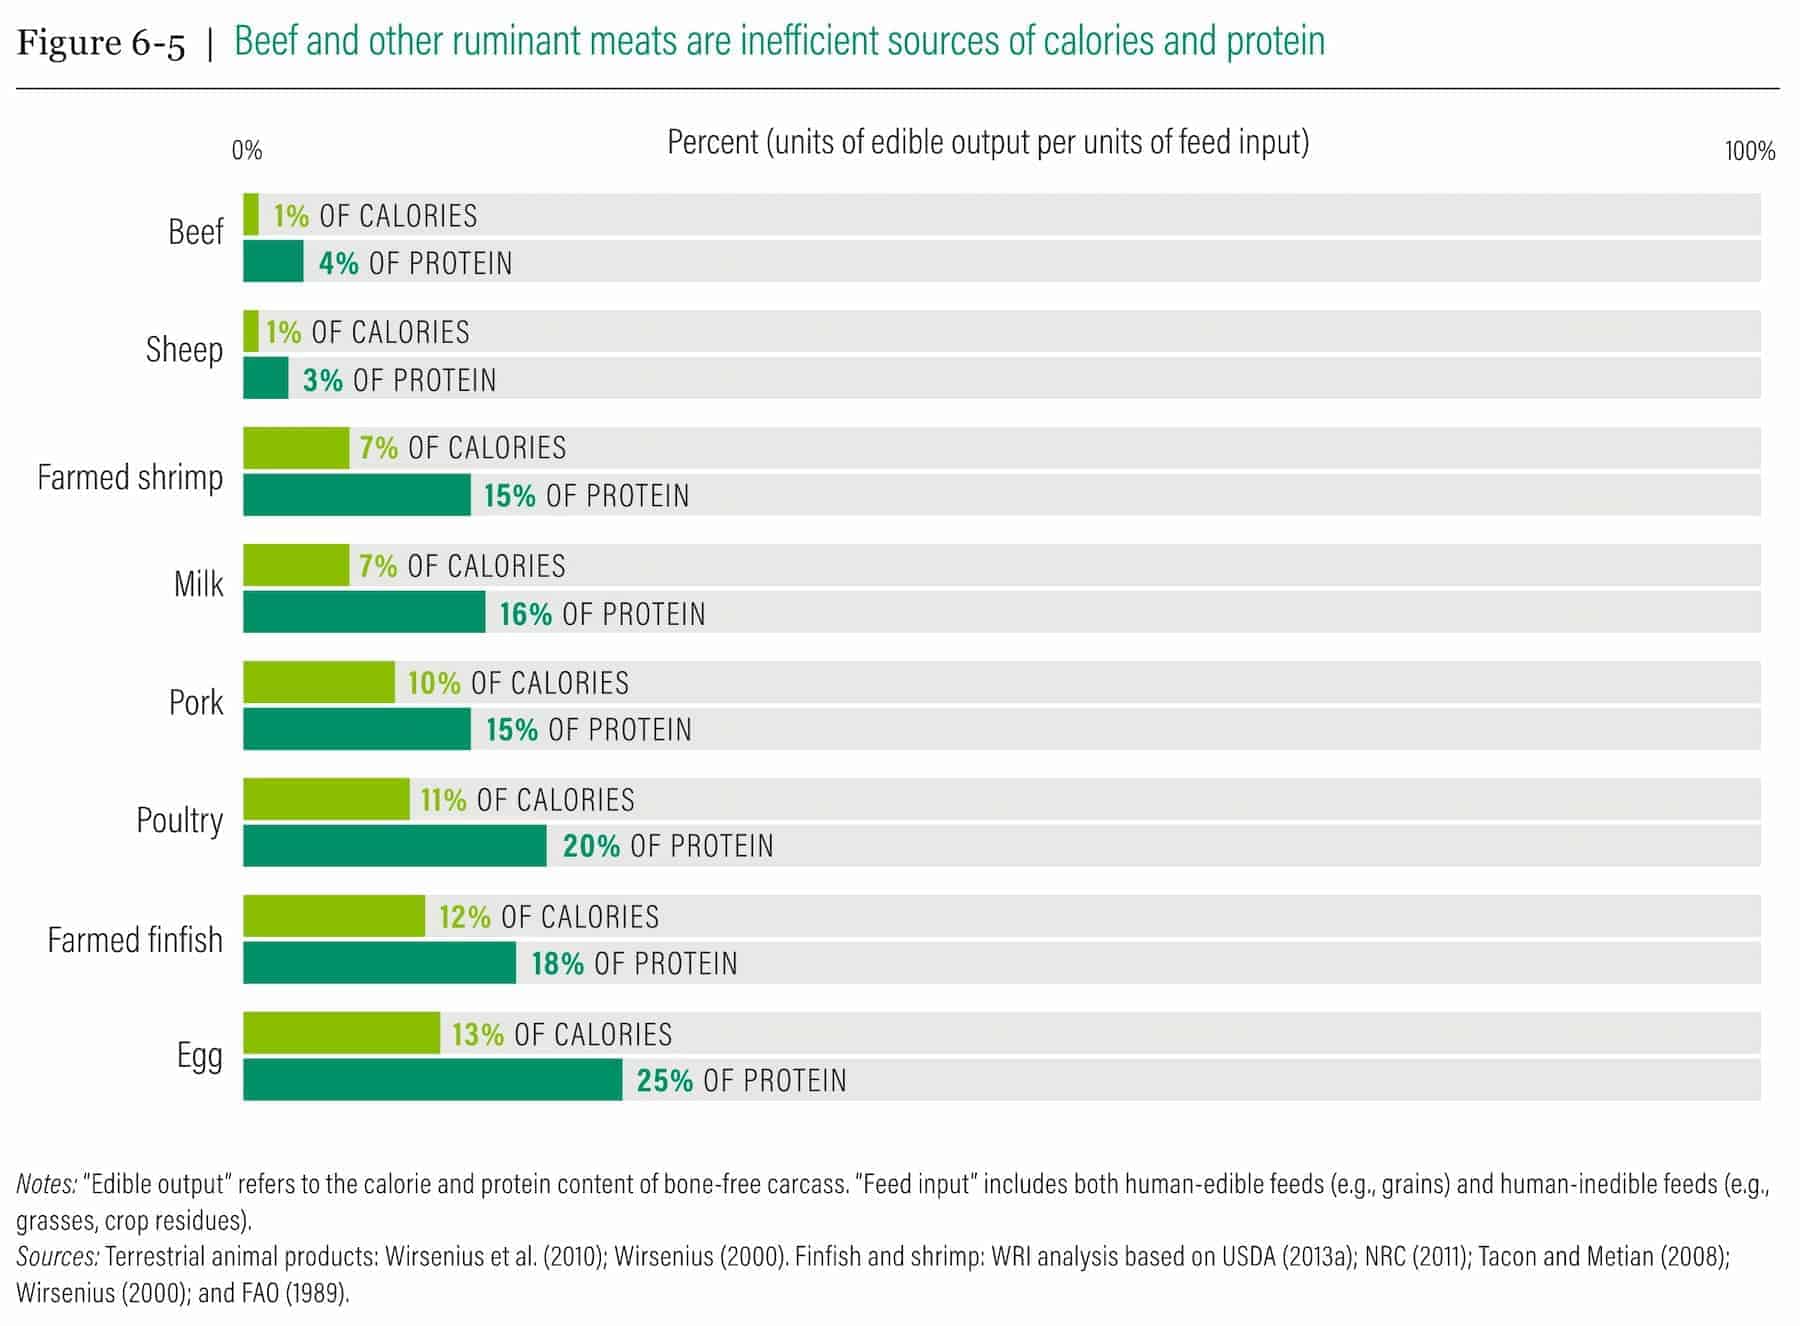 A graphic showing that animal products are inefficient sources of calories and protein.